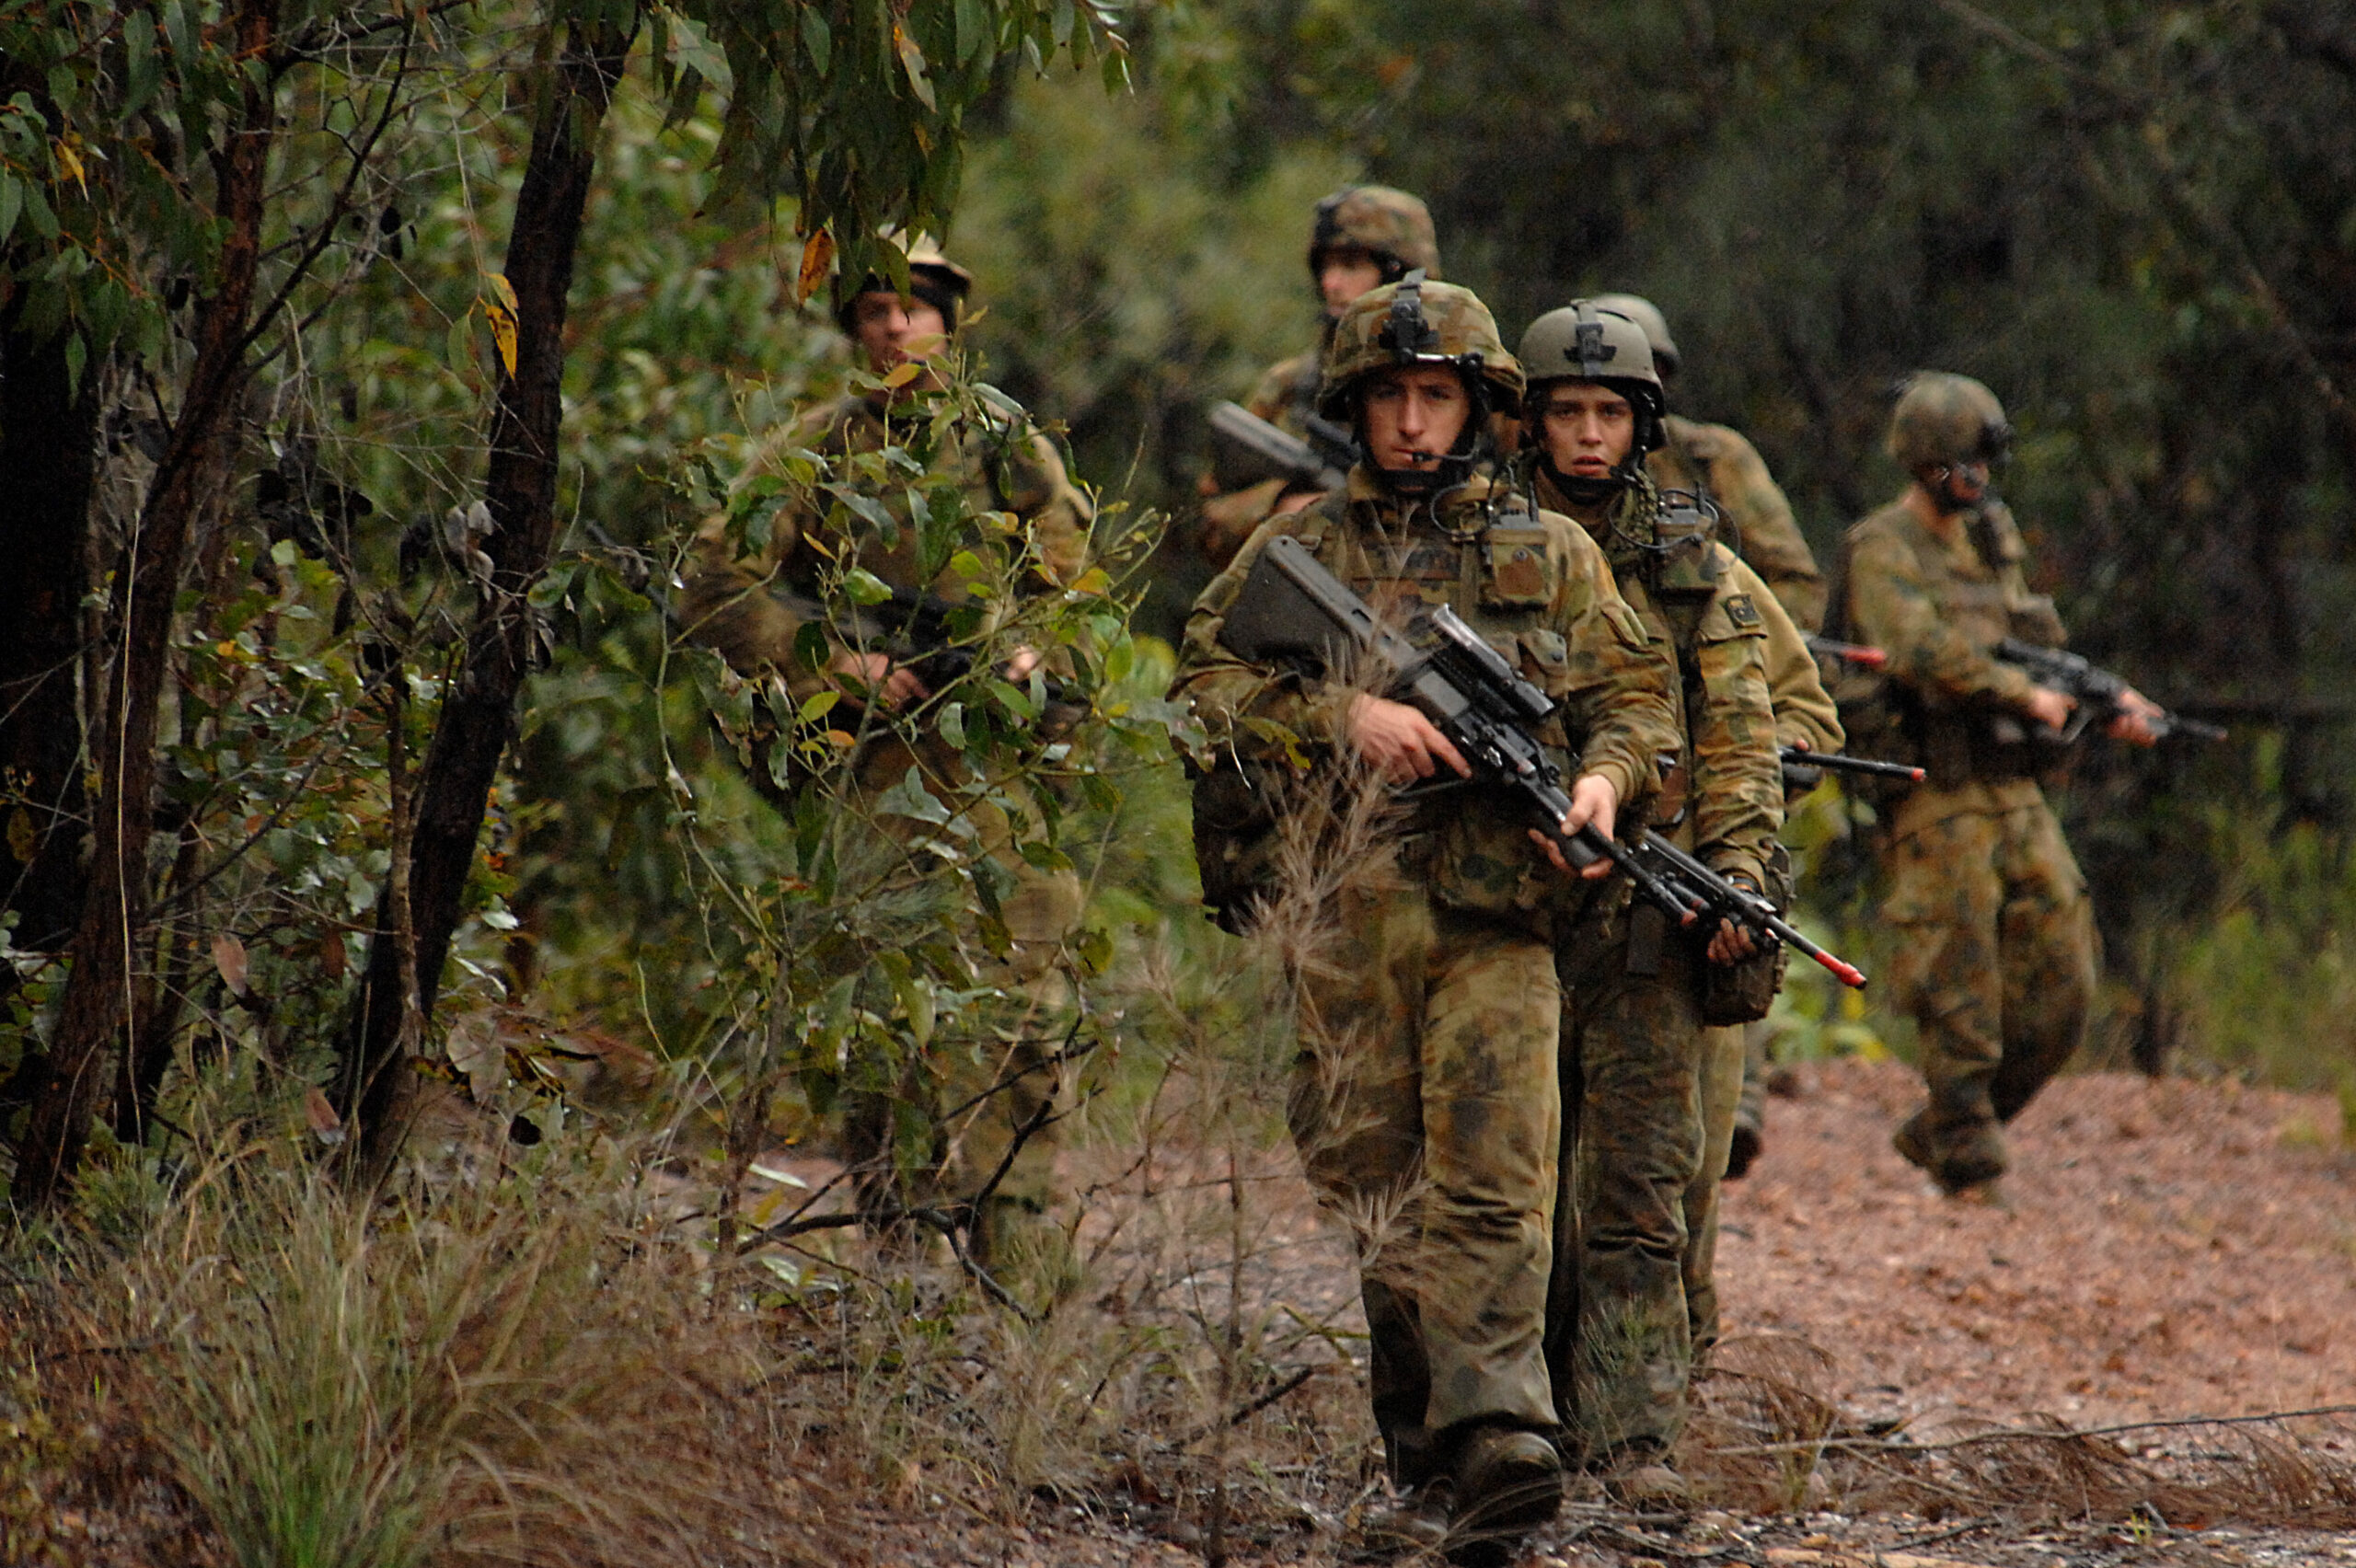 Soldiers from the 2nd Battalion, Royal Australian Regiment conducts a foot patrol during exercise Talisman Sabre 2007 in Shoalwater Bay.